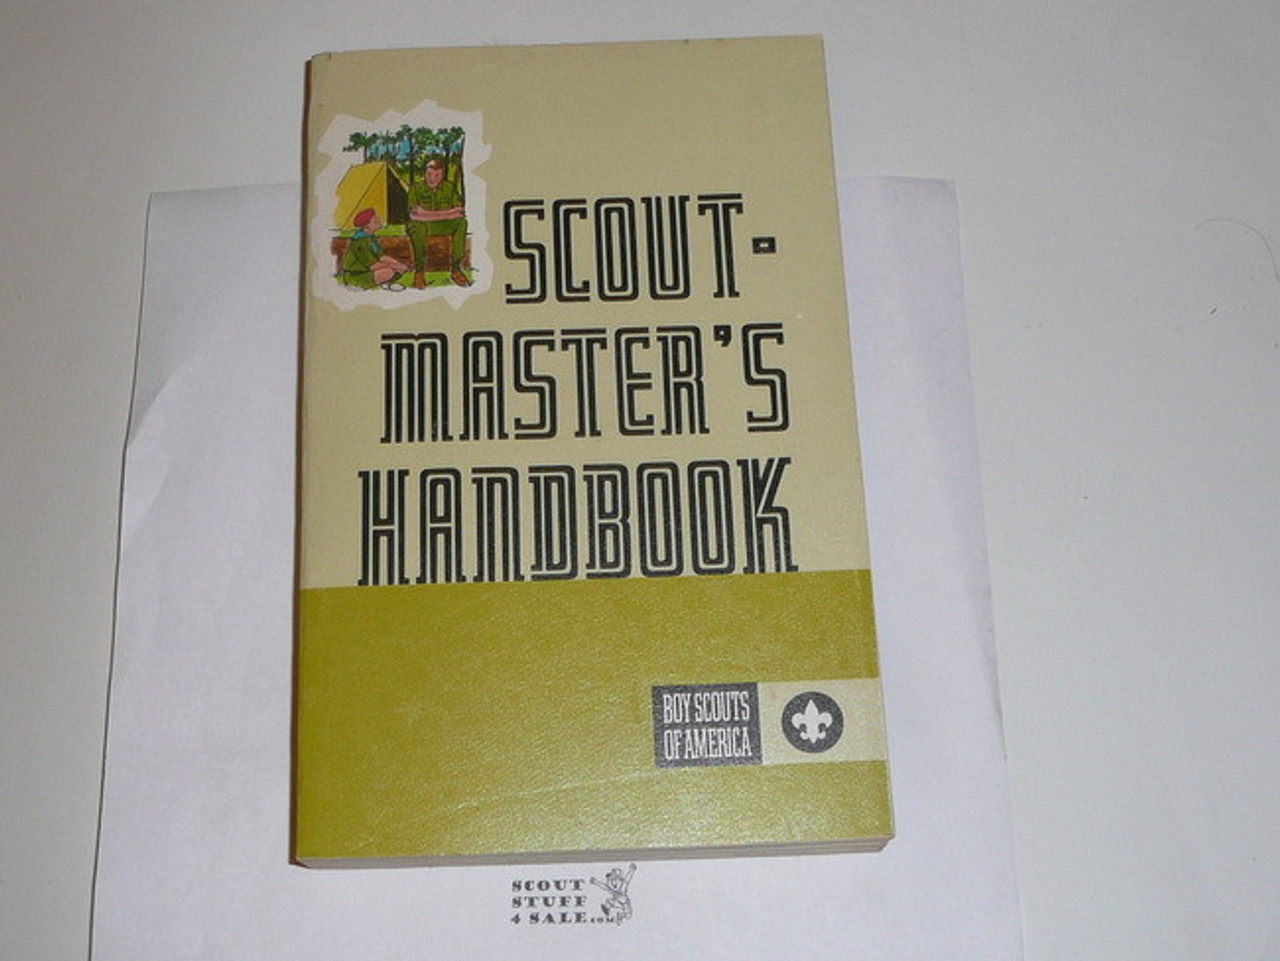 1976 Scoutmasters Handbook, Sixth Edition, Fifth Printing, MINT Condition but name on the cover